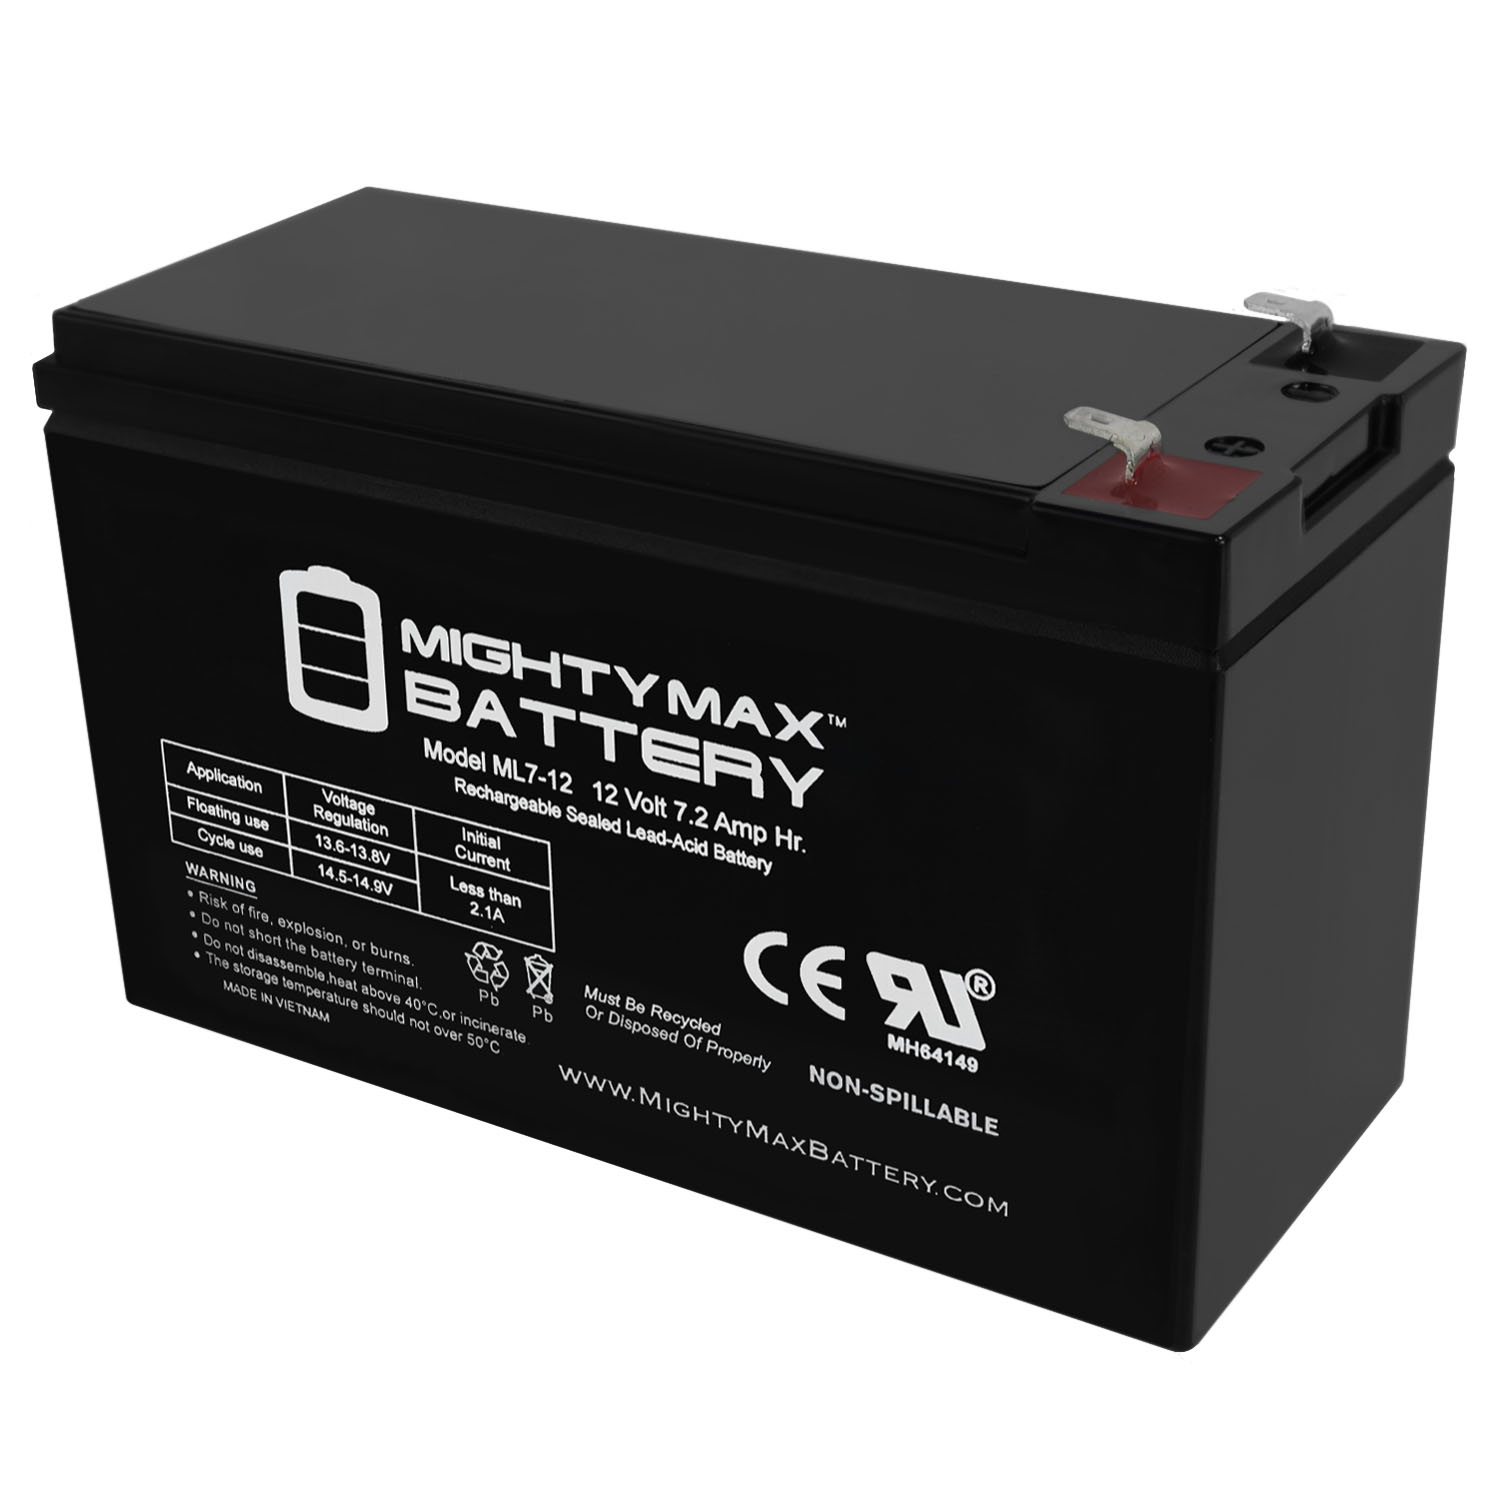 Statistical hire deal with ML7-12 - 12 Volt 7.2 AH, F1 Terminal, Rechargeable SLA AGM Battery -  MightyMaxBattery